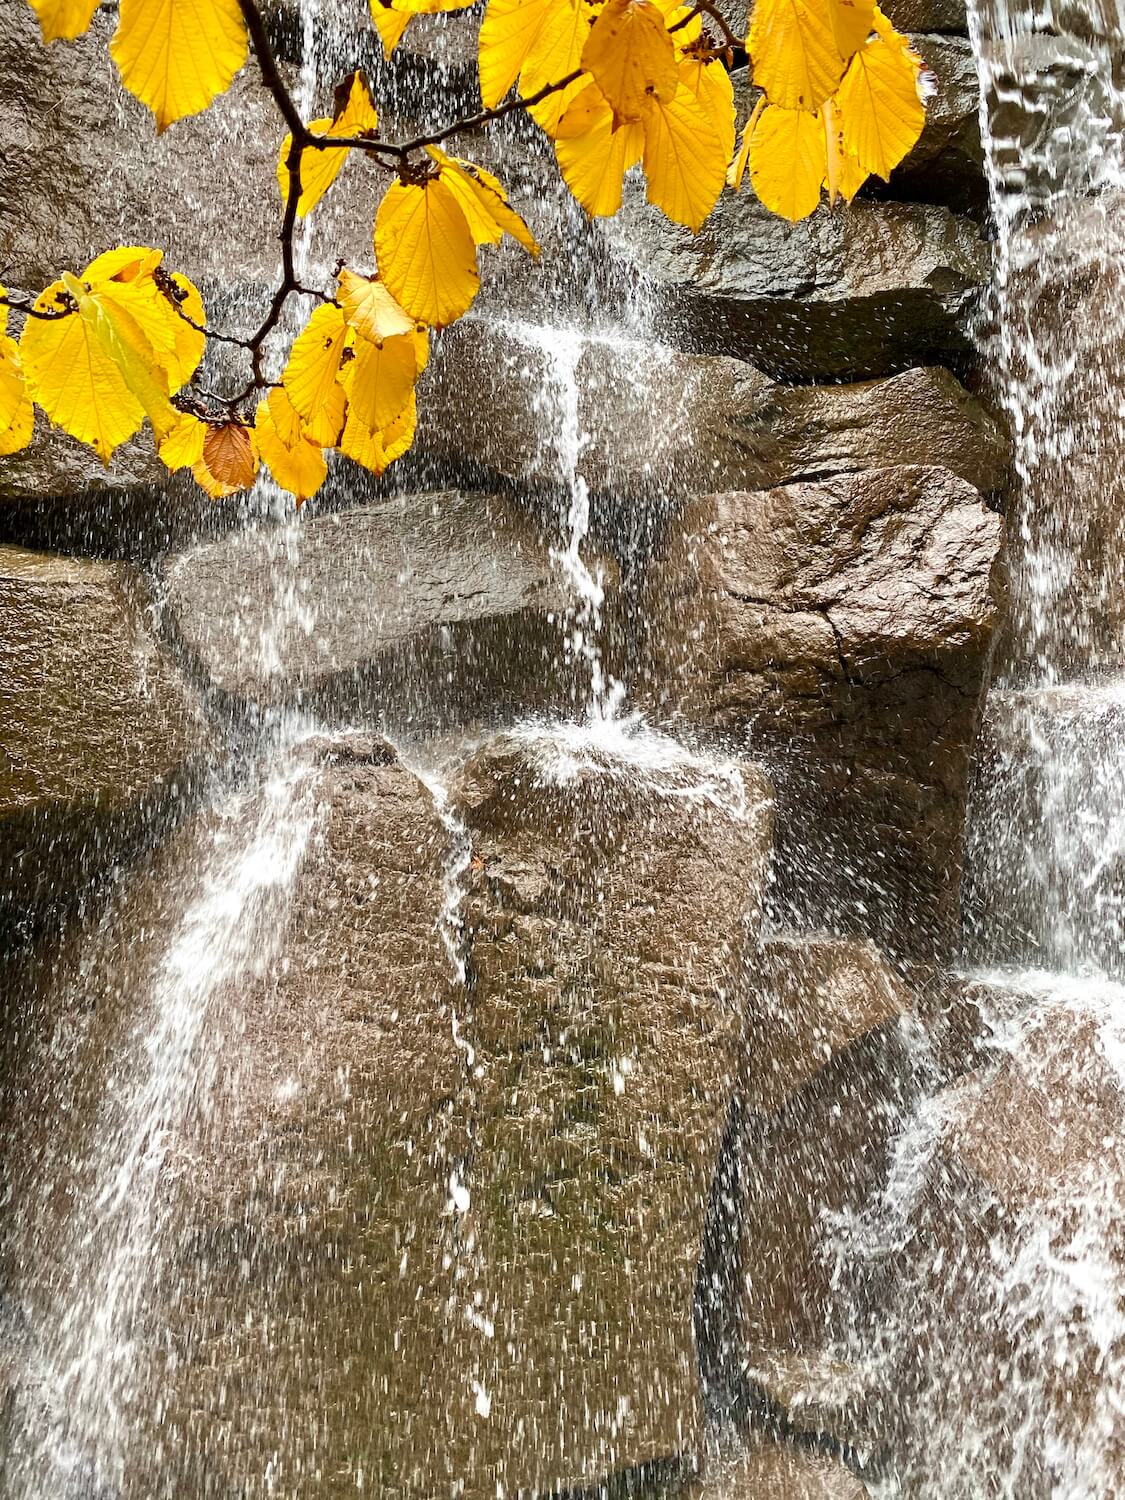 Water splashes down a waterfall in this Fall in Seattle scene, including a branch with yellow autumn leaves.